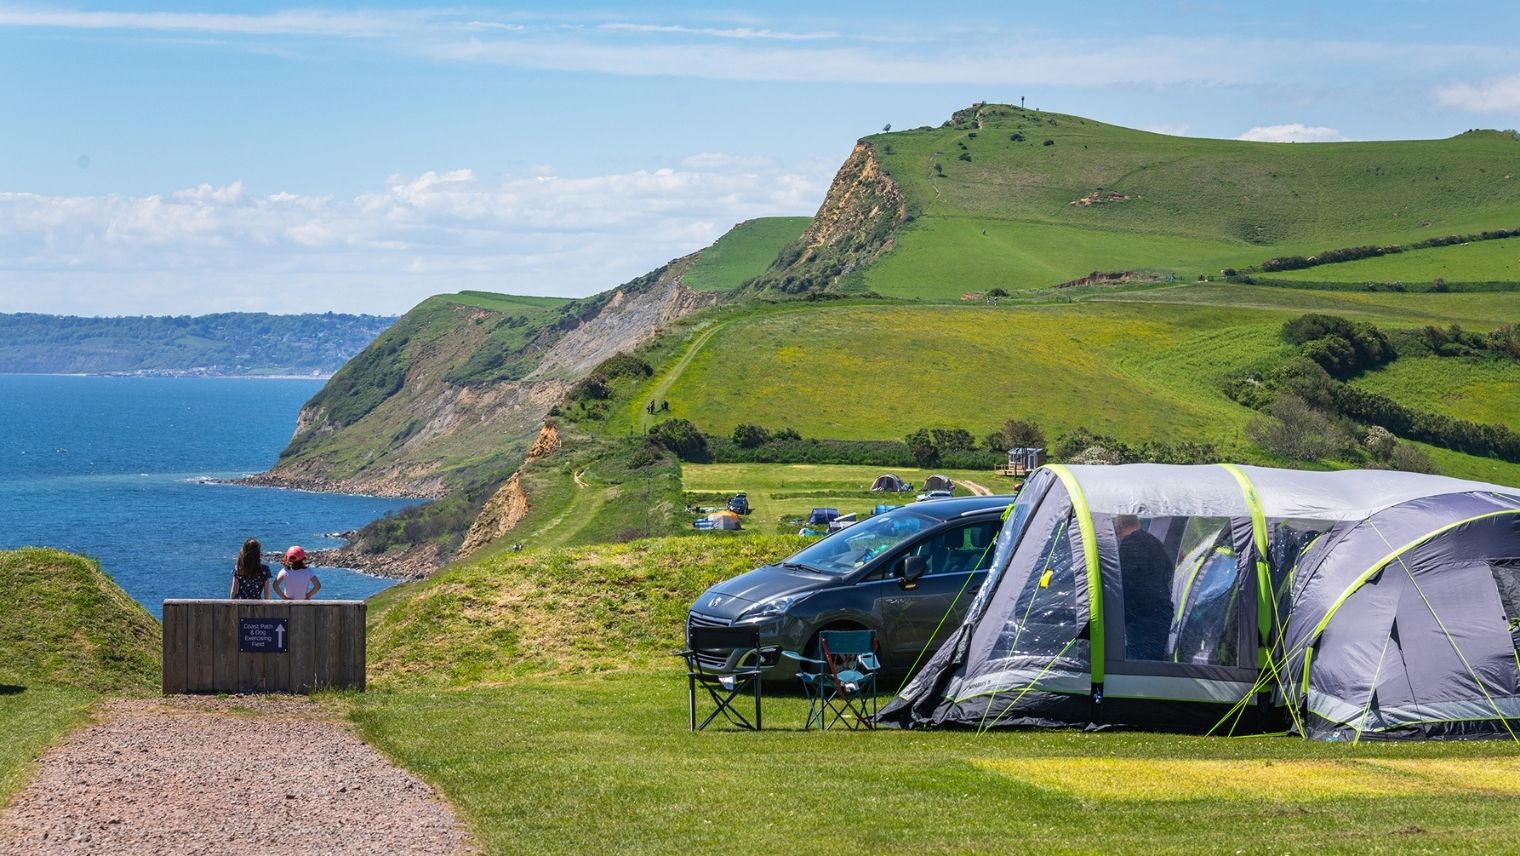 A view over the Jurassic coastline with a tent at Rosewall campsite in the foreground